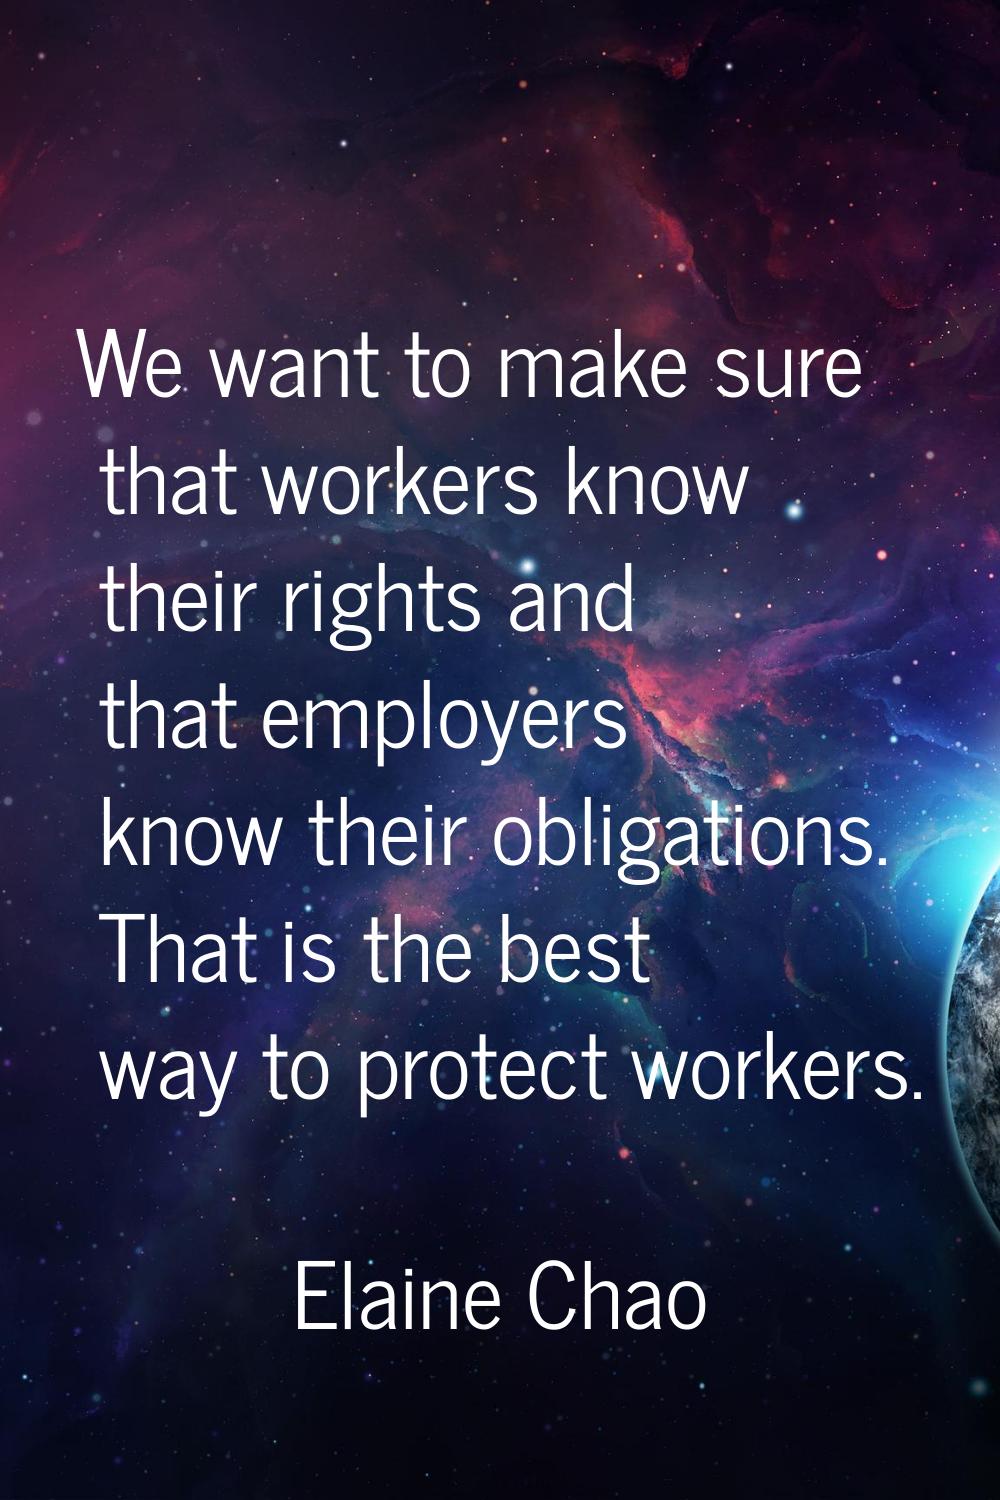 We want to make sure that workers know their rights and that employers know their obligations. That